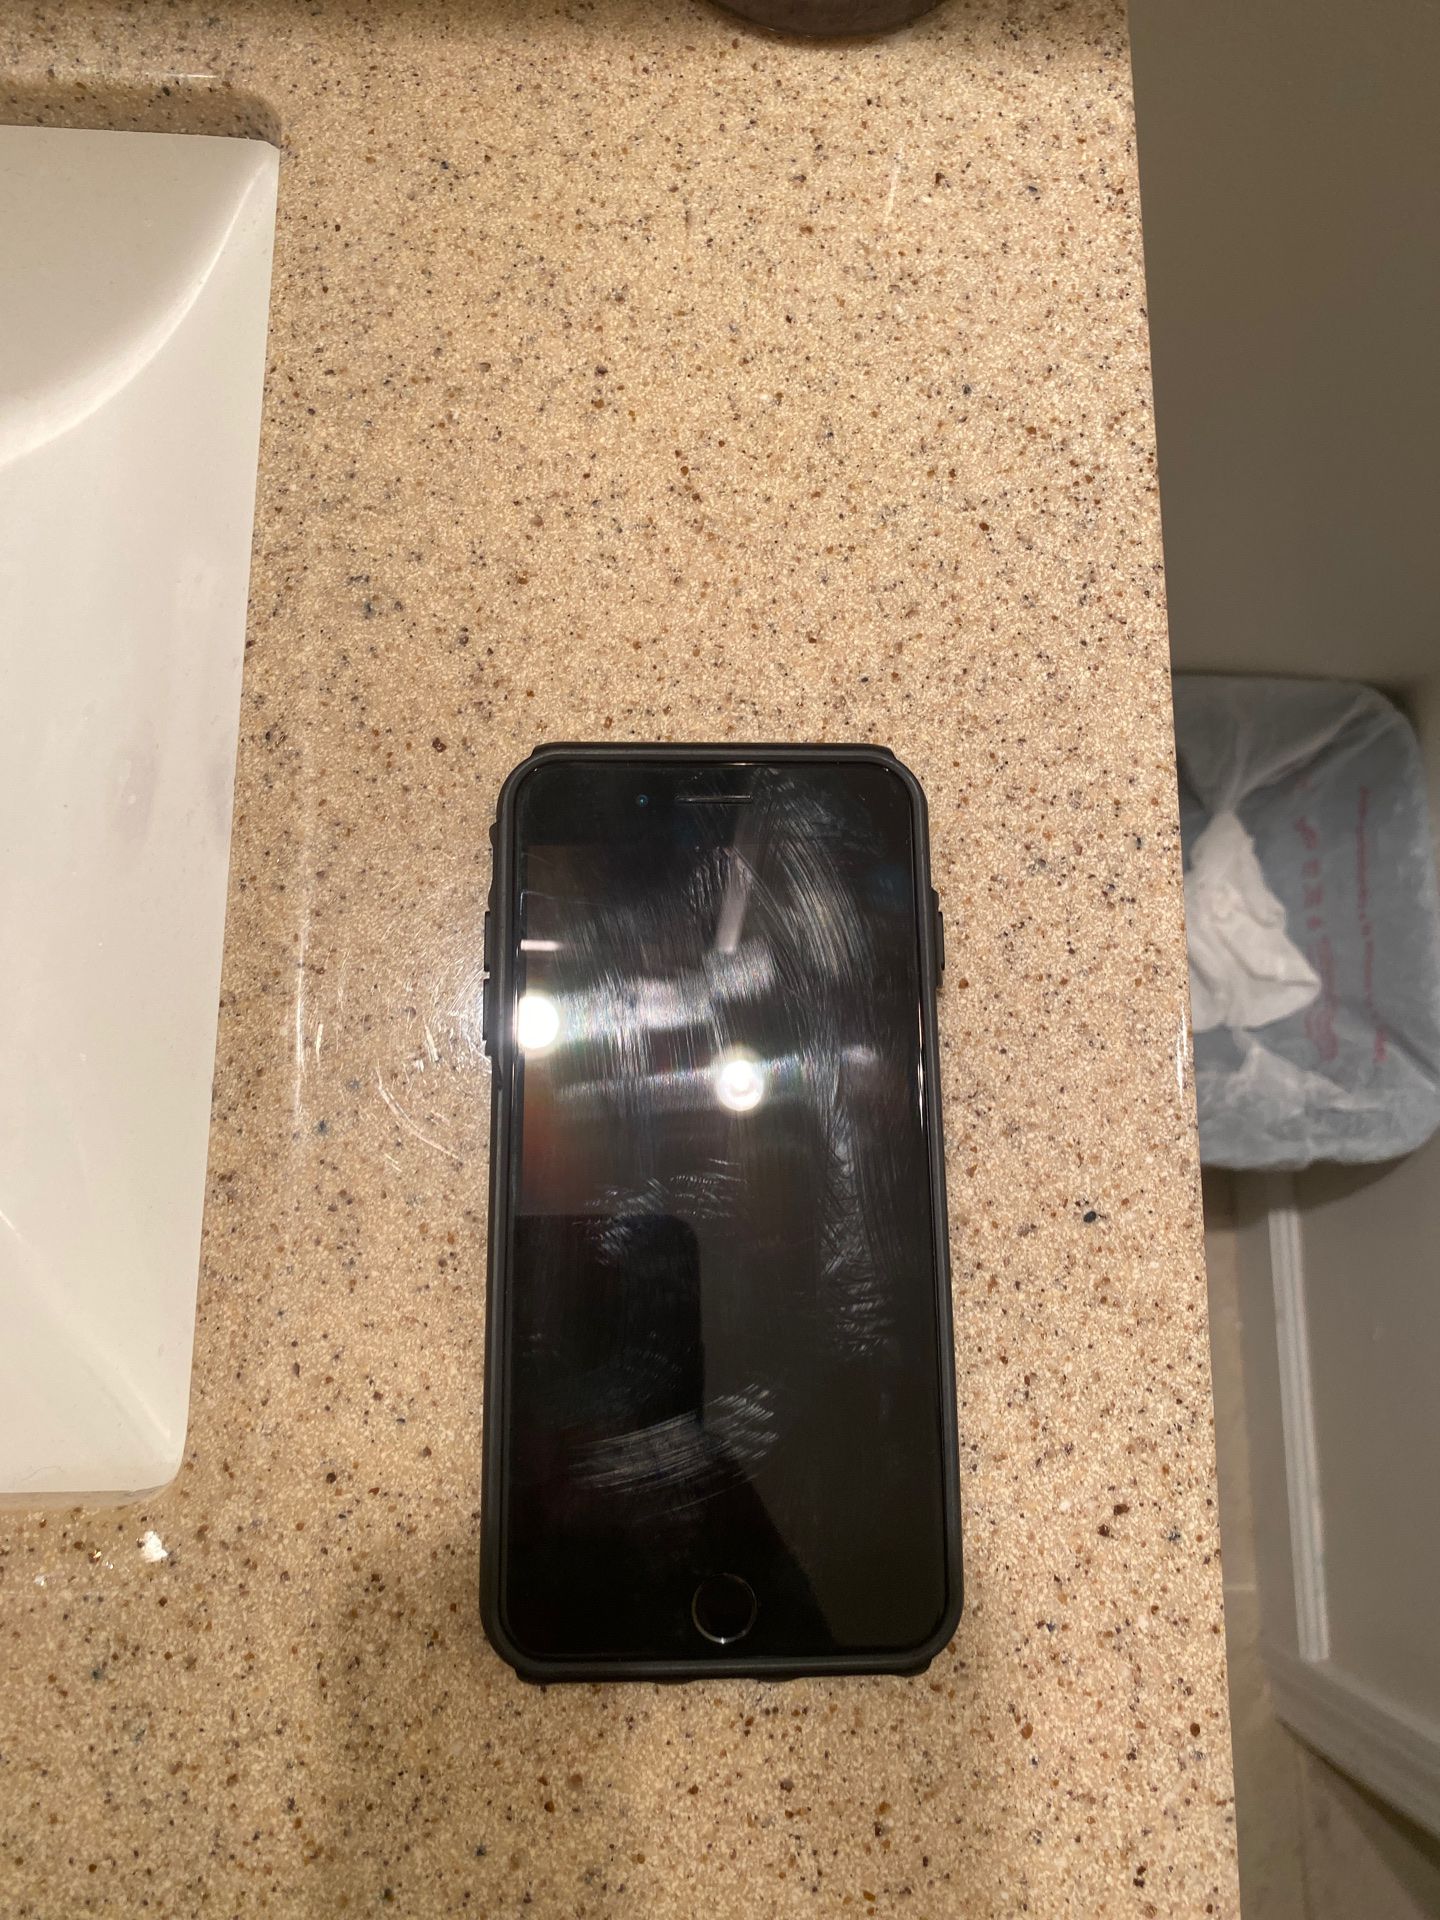 IPhone 7 Plus. ( Perfect condition) It is unlocked and is fully erased. Price is $350. I can can be contacted through the number listed on my account